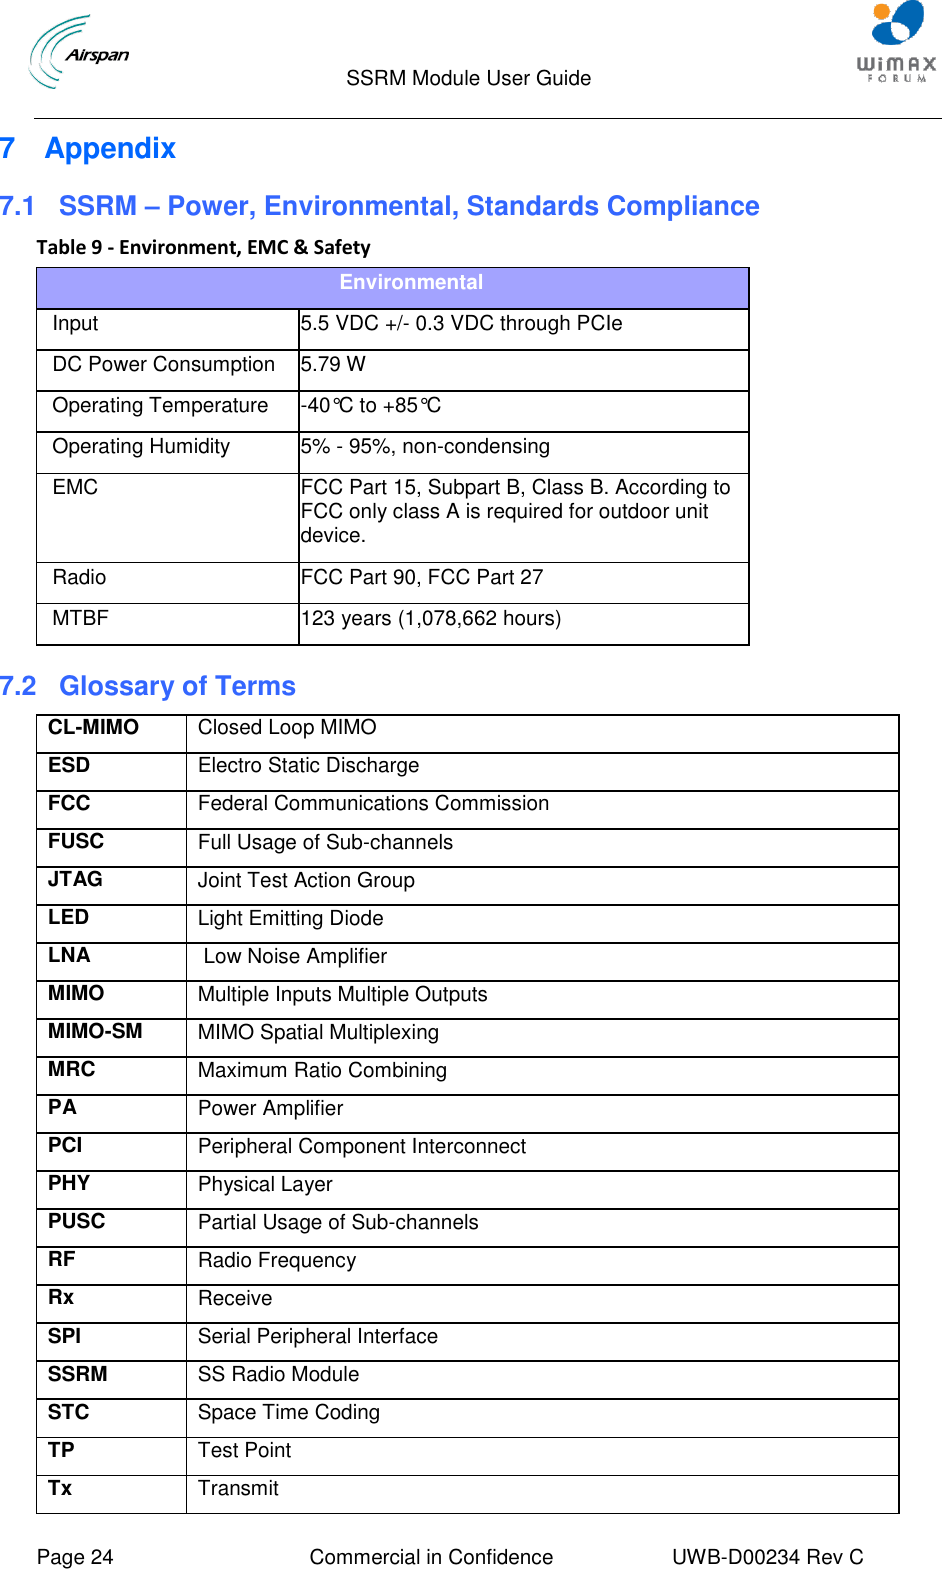                                  SSRM Module User Guide     Page 24  Commercial in Confidence  UWB-D00234 Rev C    7  Appendix 7.1 SSRM – Power, Environmental, Standards Compliance Table 9 - Environment, EMC &amp; Safety Environmental Input  5.5 VDC +/- 0.3 VDC through PCIe  DC Power Consumption 5.79 W Operating Temperature -40°C to +85°C Operating Humidity 5% - 95%, non-condensing EMC FCC Part 15, Subpart B, Class B. According to FCC only class A is required for outdoor unit device. Radio FCC Part 90, FCC Part 27   MTBF 123 years (1,078,662 hours) 7.2  Glossary of Terms CL-MIMO    Closed Loop MIMO ESD Electro Static Discharge FCC               Federal Communications Commission FUSC Full Usage of Sub-channels JTAG Joint Test Action Group LED Light Emitting Diode LNA  Low Noise Amplifier MIMO Multiple Inputs Multiple Outputs MIMO-SM    MIMO Spatial Multiplexing MRC Maximum Ratio Combining PA Power Amplifier PCI Peripheral Component Interconnect PHY Physical Layer PUSC Partial Usage of Sub-channels RF Radio Frequency Rx Receive SPI Serial Peripheral Interface SSRM SS Radio Module STC Space Time Coding TP Test Point Tx Transmit 